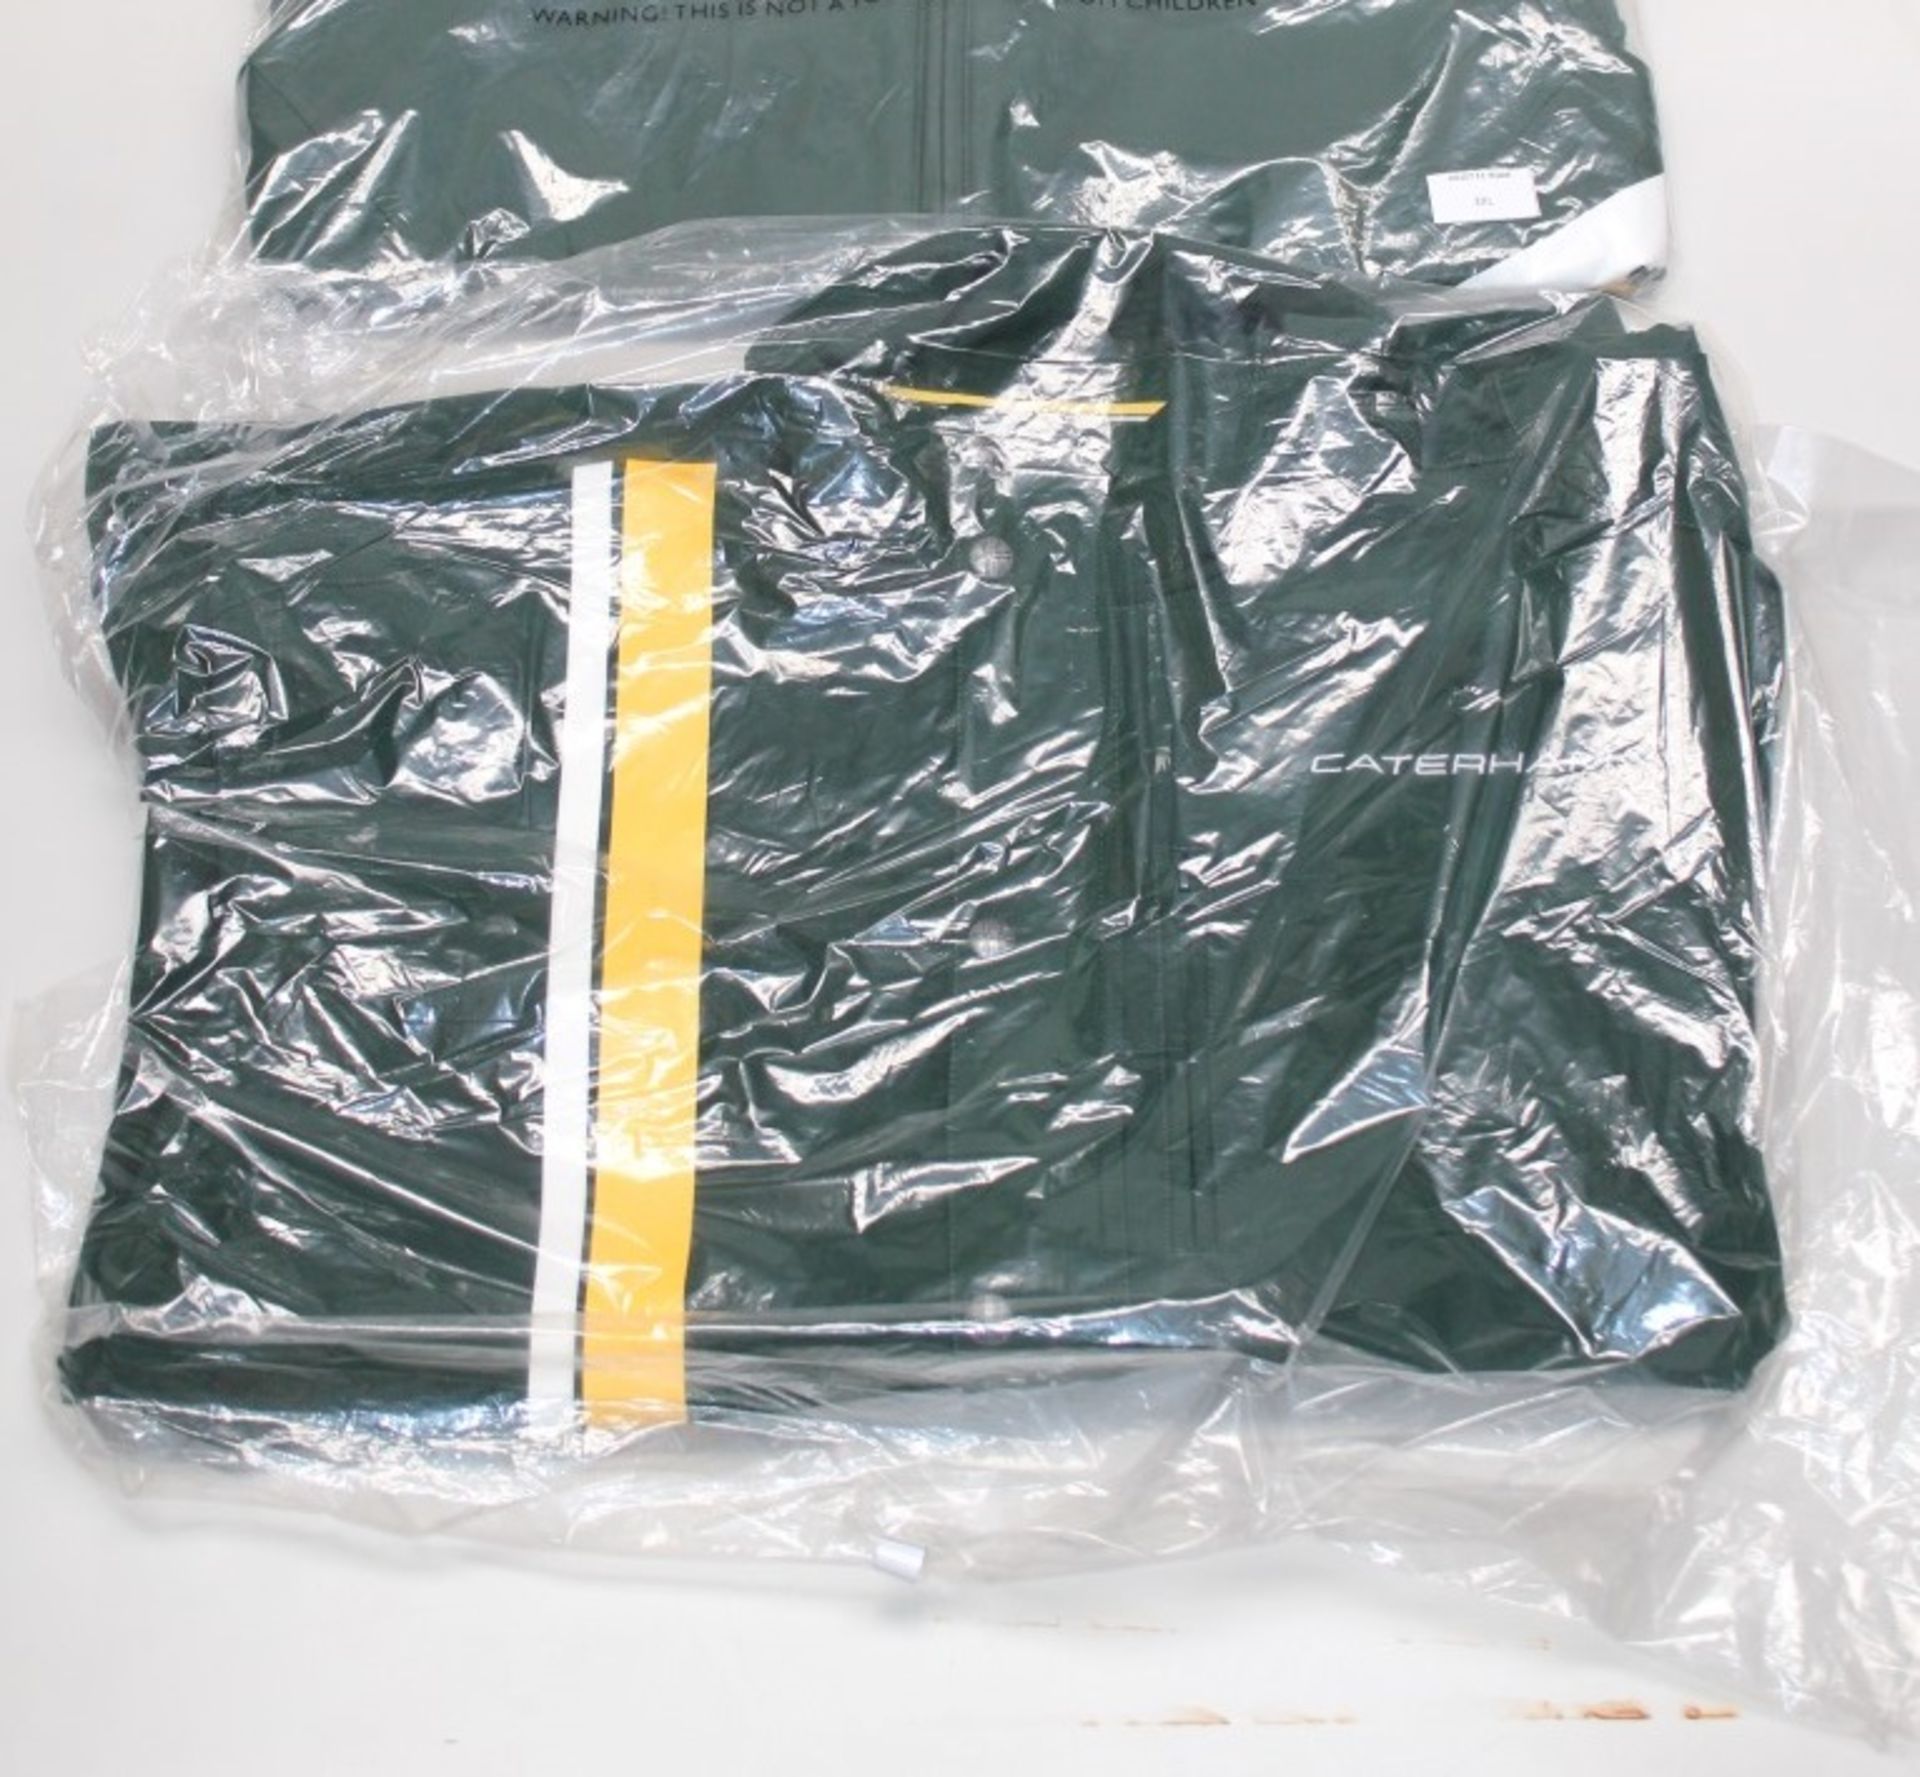 17 x Caterham F1 Team Jackets - An Assortment Of Different Styles & Designs, See Pictures - - Image 7 of 8